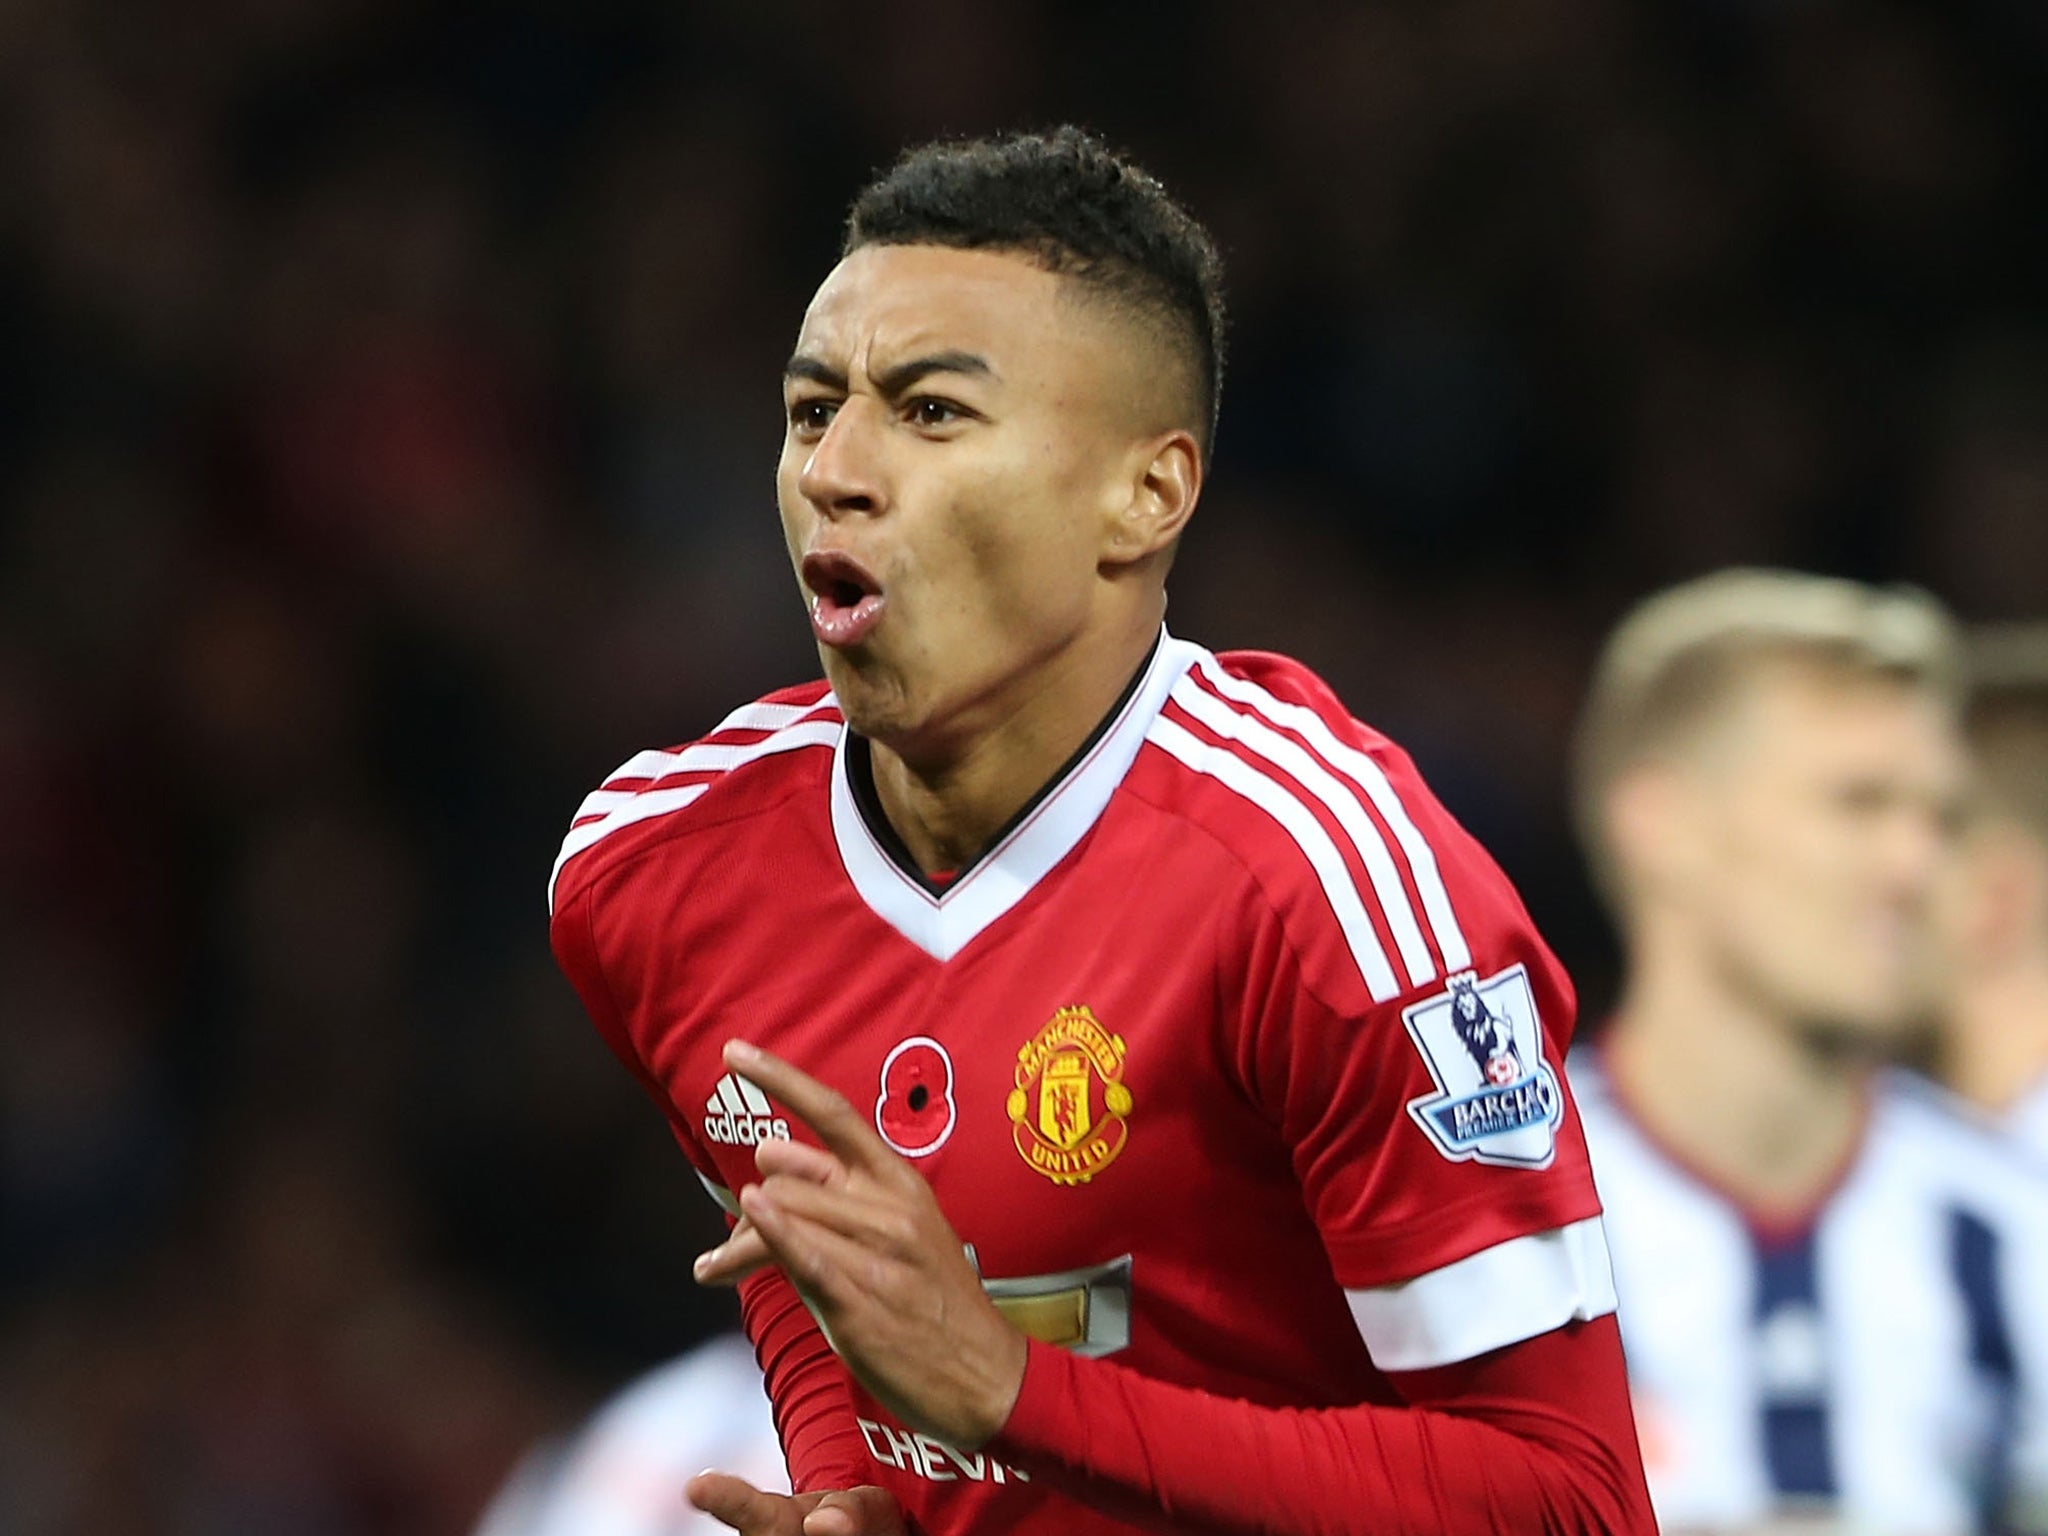 Manchester United Winger Jesse Lingard Is An English Andres Iniesta Says Rene Meulensteen A6747306